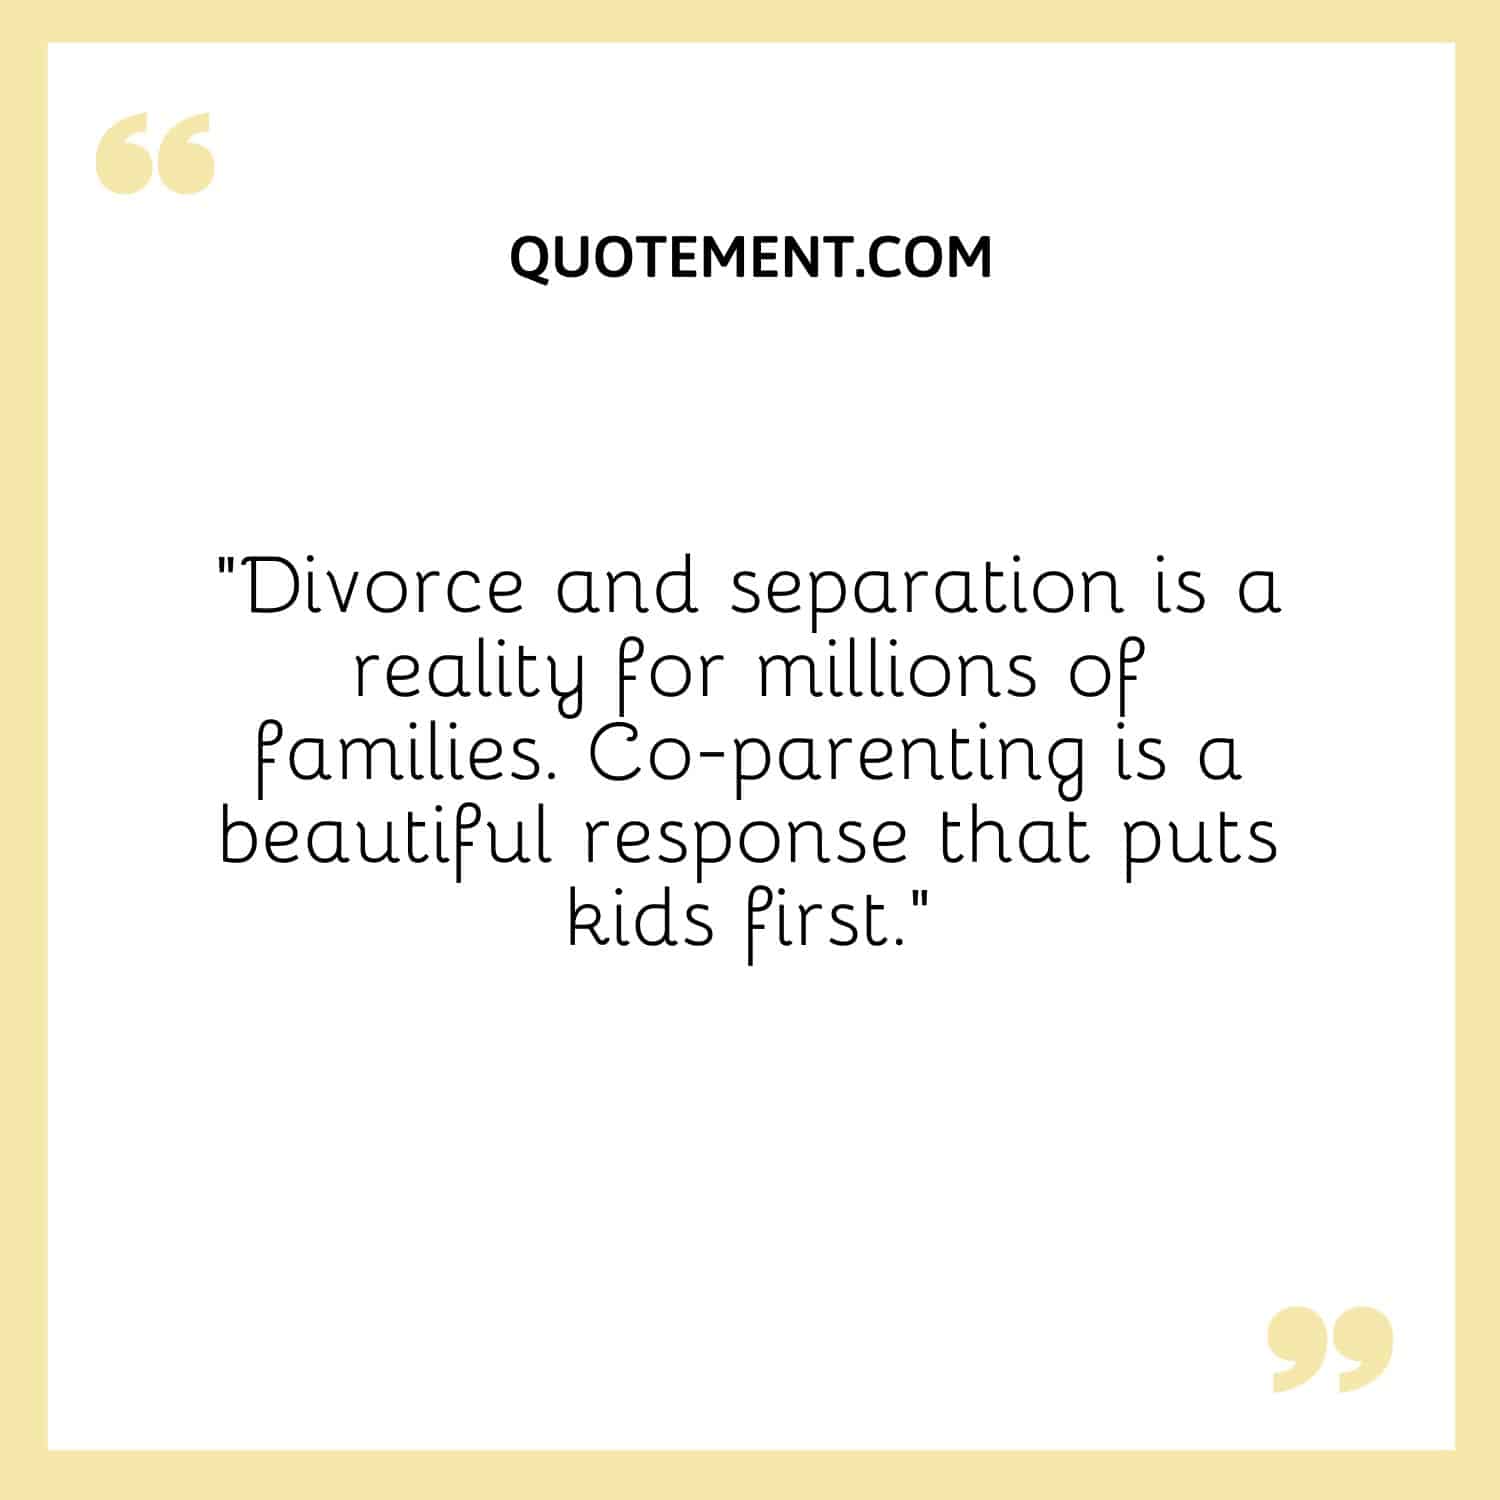 Divorce and separation is a reality for millions of families